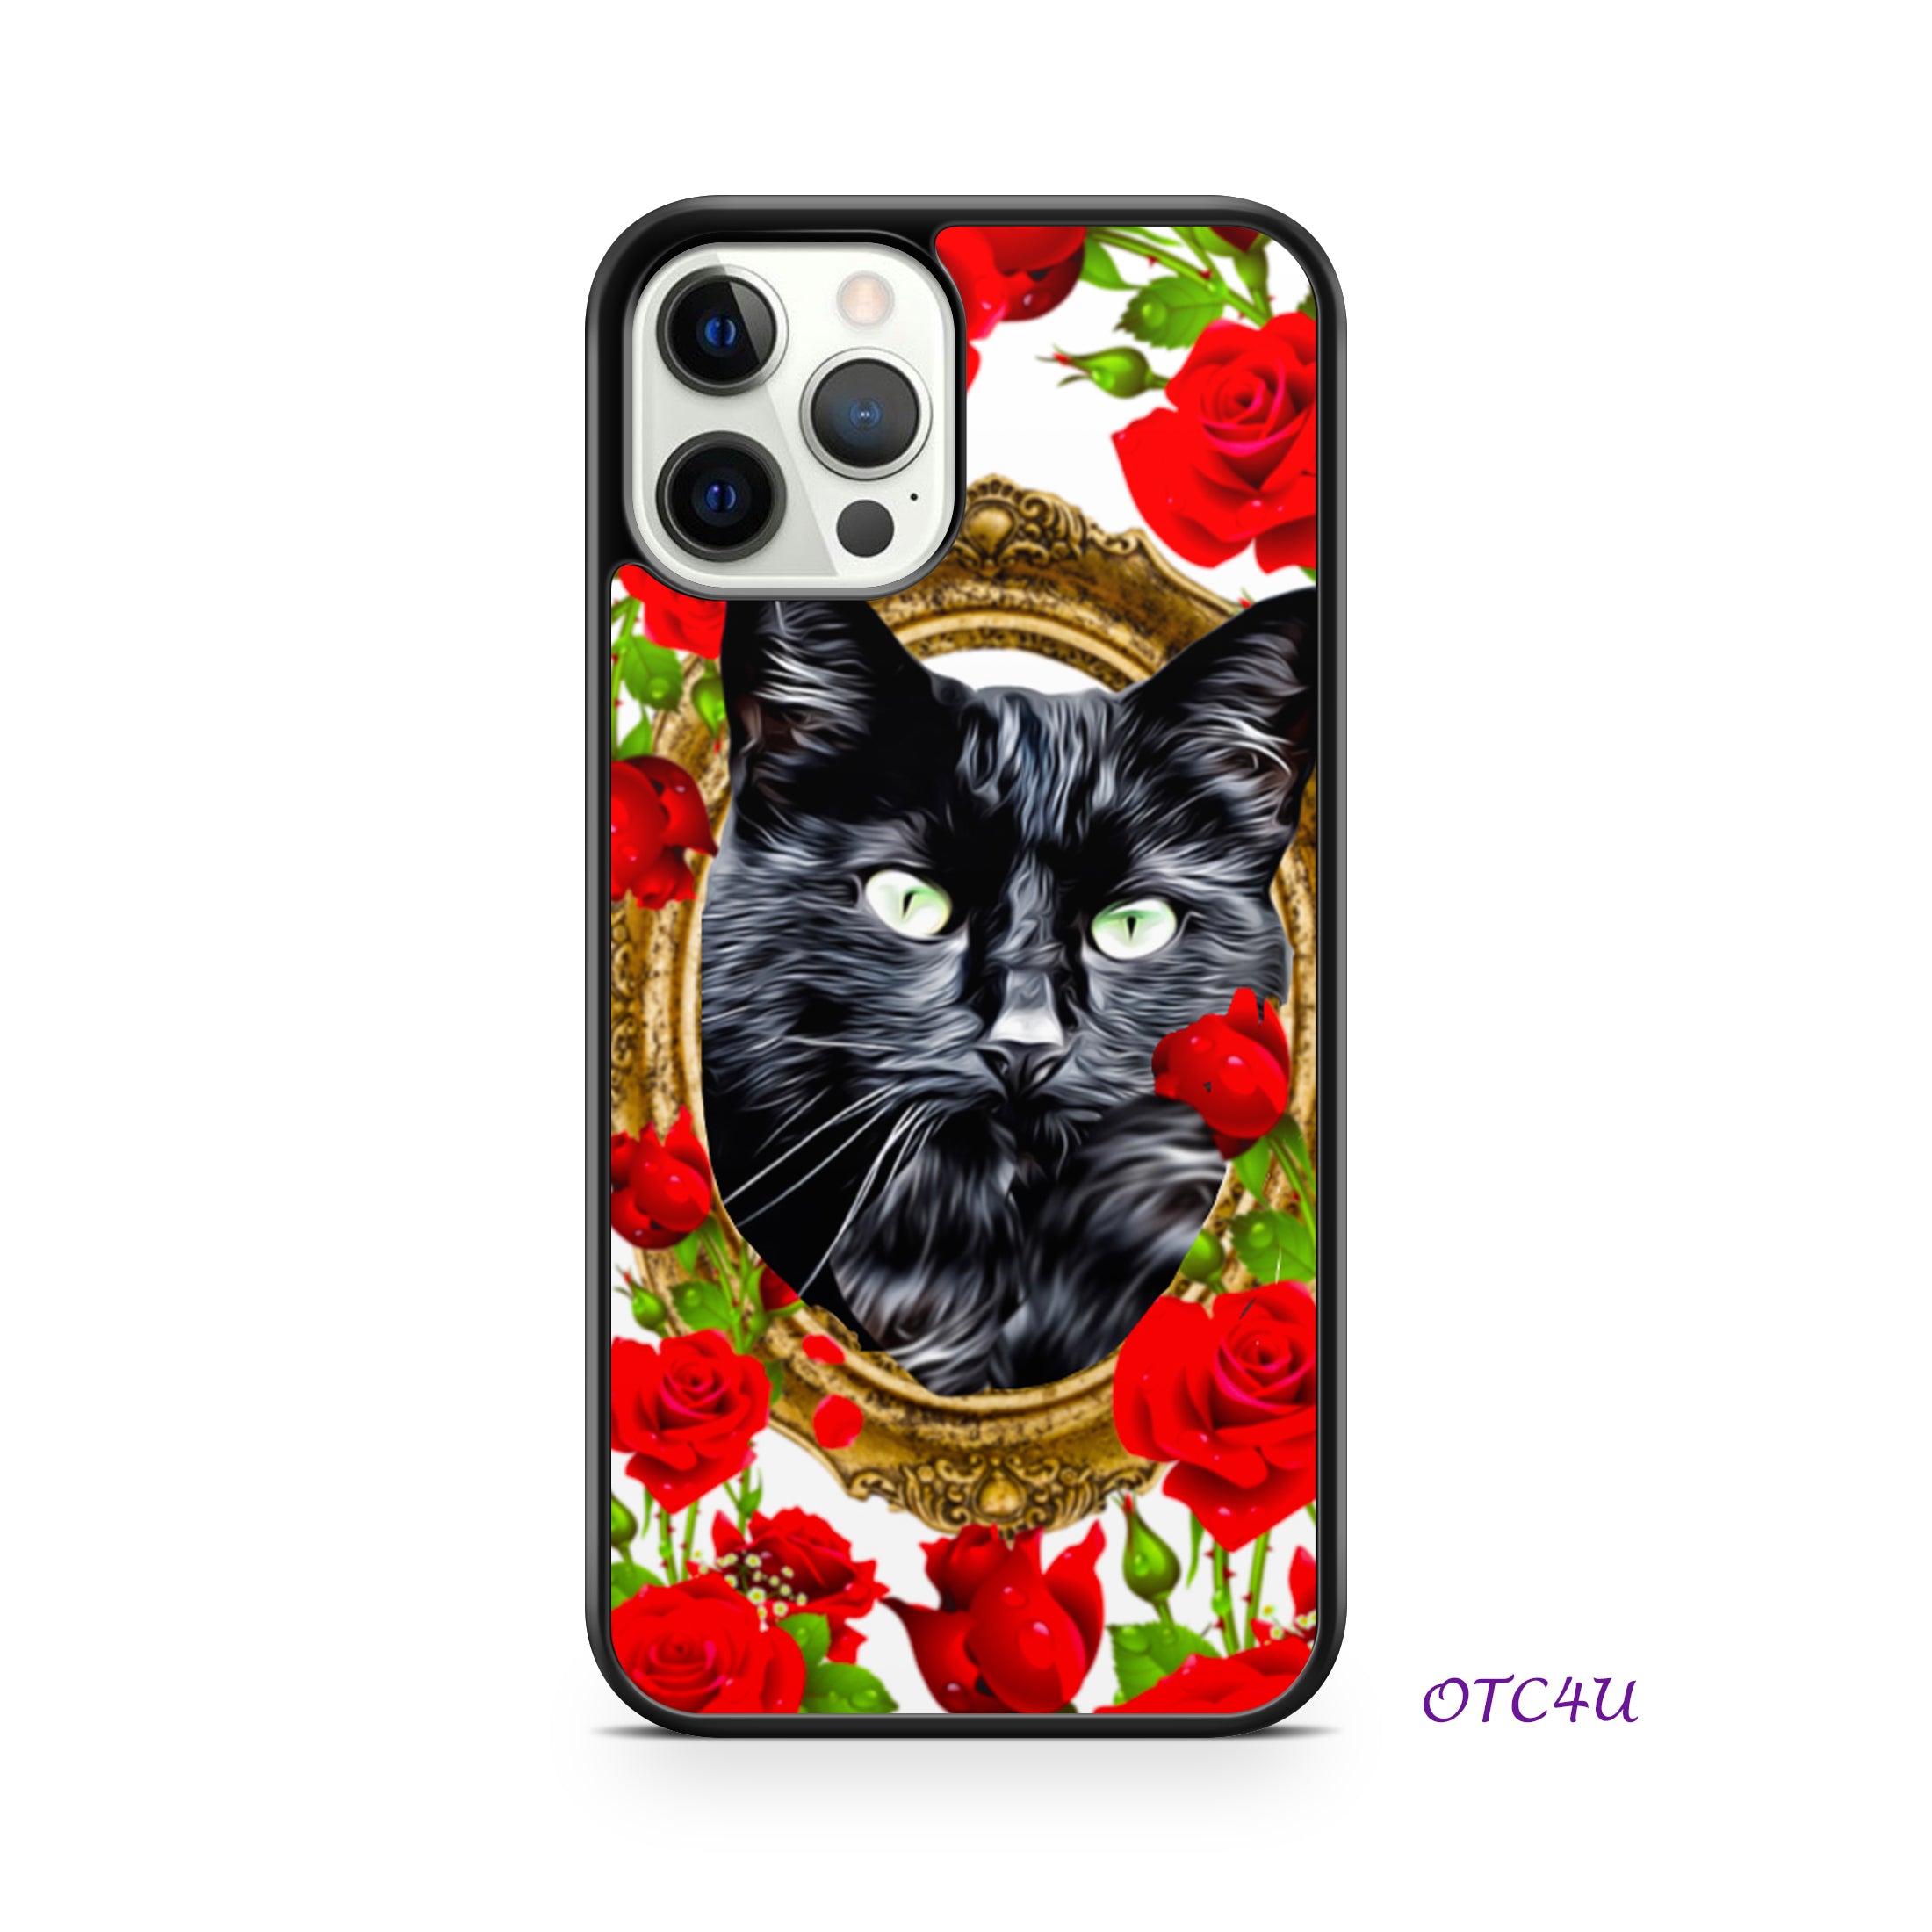 Samsung Phone Case With Custom Pet Portrait and Flowers